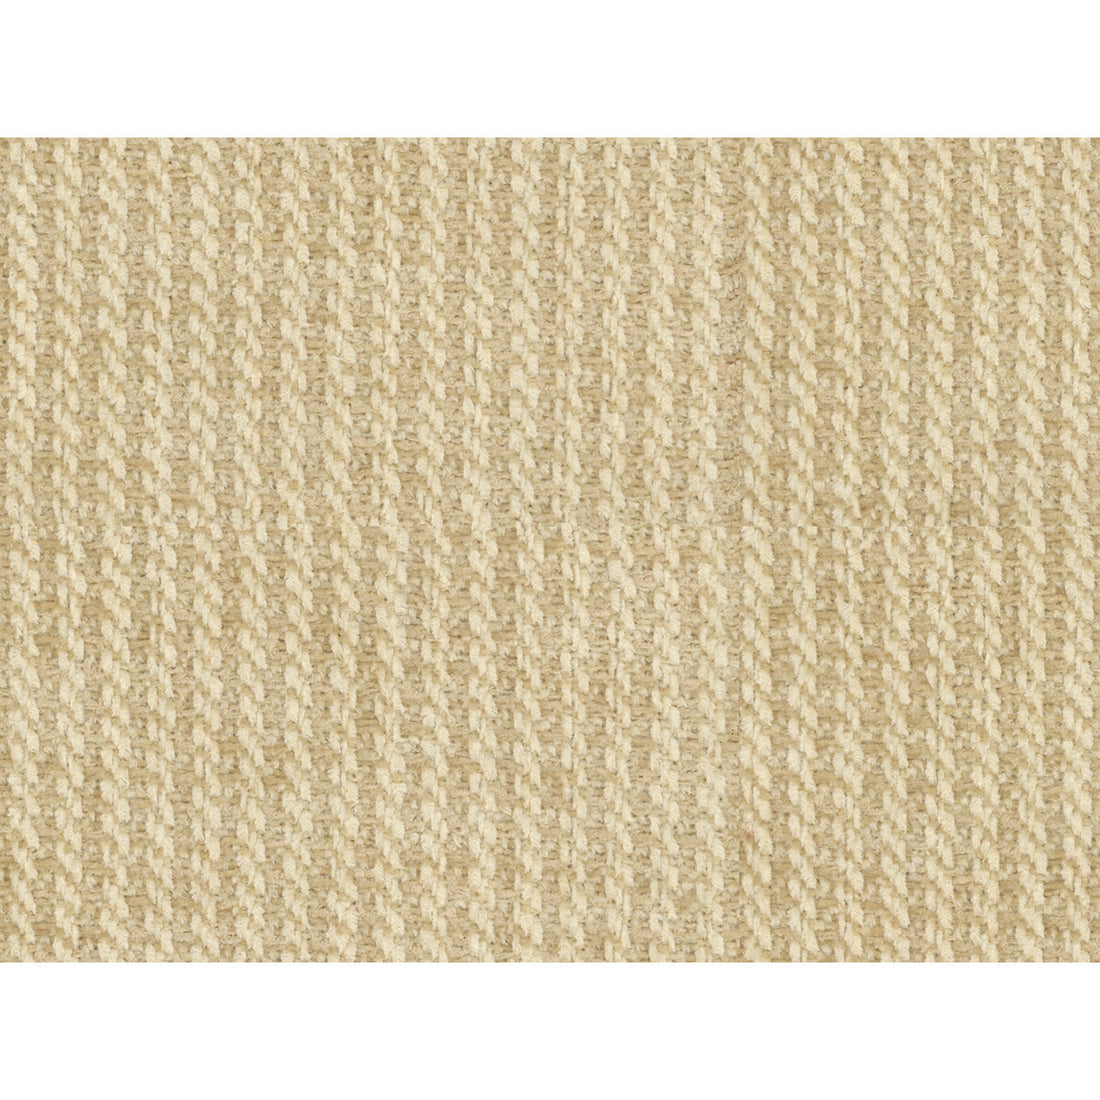 Granier Chenille fabric in almond color - pattern 8016105.16.0 - by Brunschwig &amp; Fils in the Chambery Textures collection